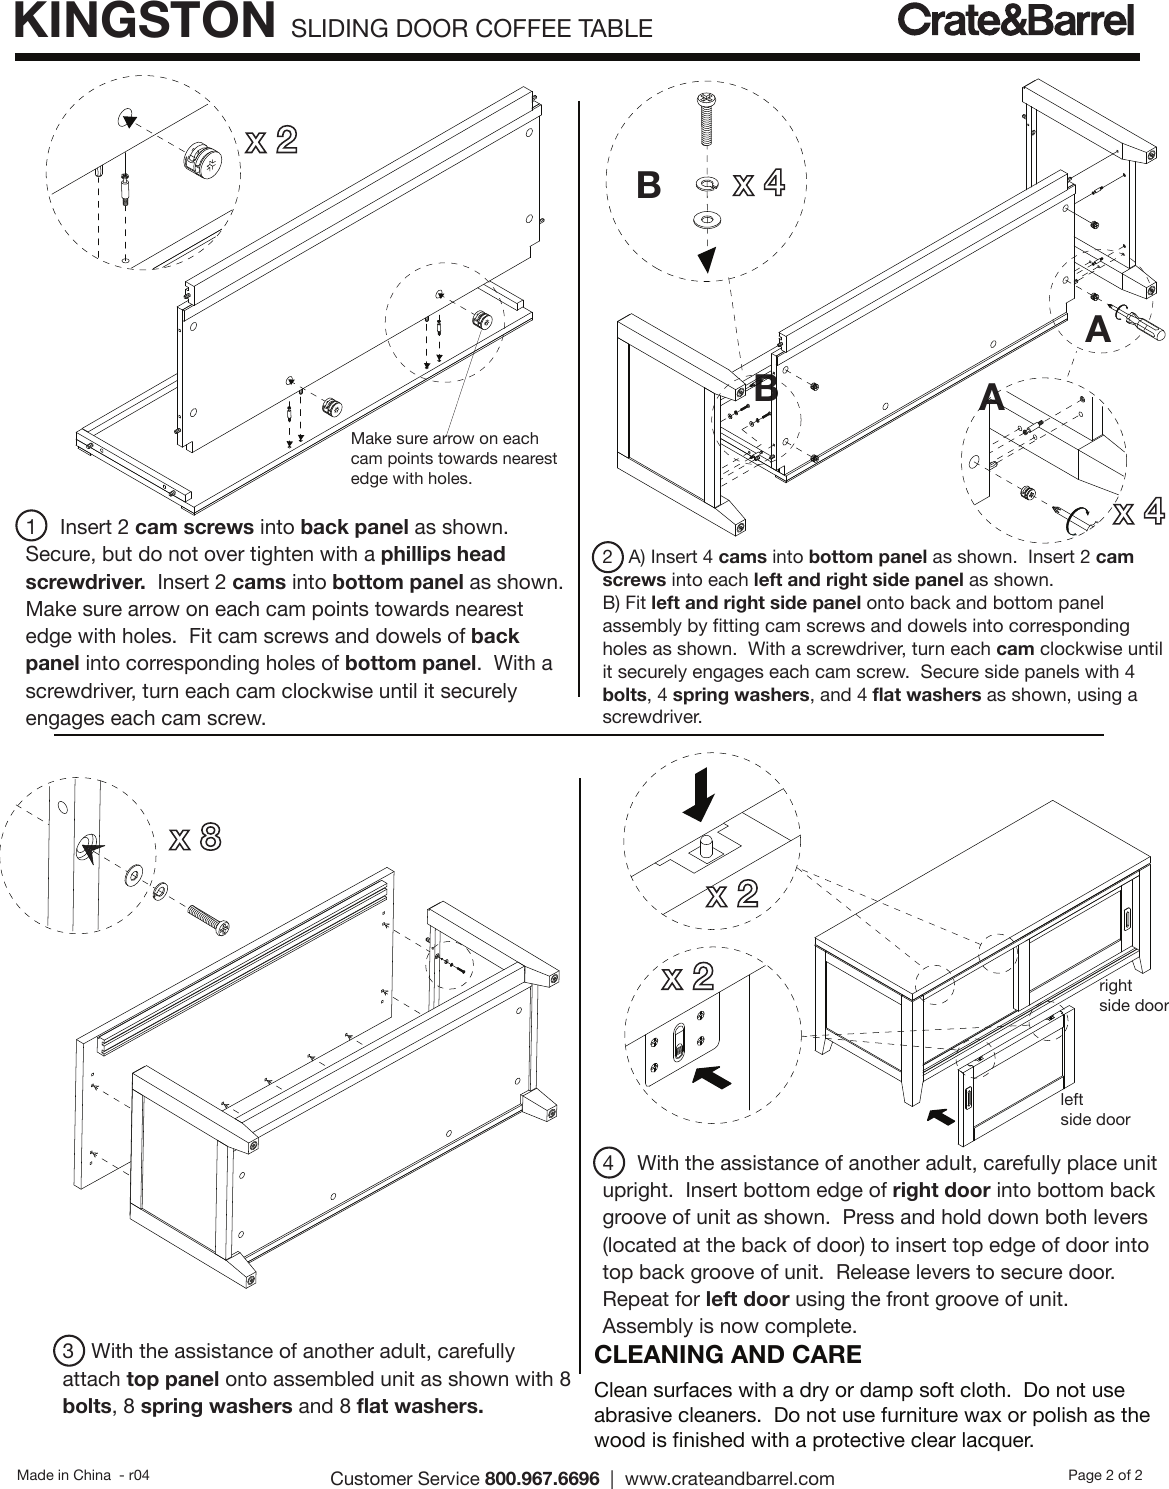 Page 2 of 2 - Crate-Barrel 570-Kingston-Sliding-Door-Coffee-Table Kingston Sliding Door Coffee Table Assembly Instructions From Crate And Barrel